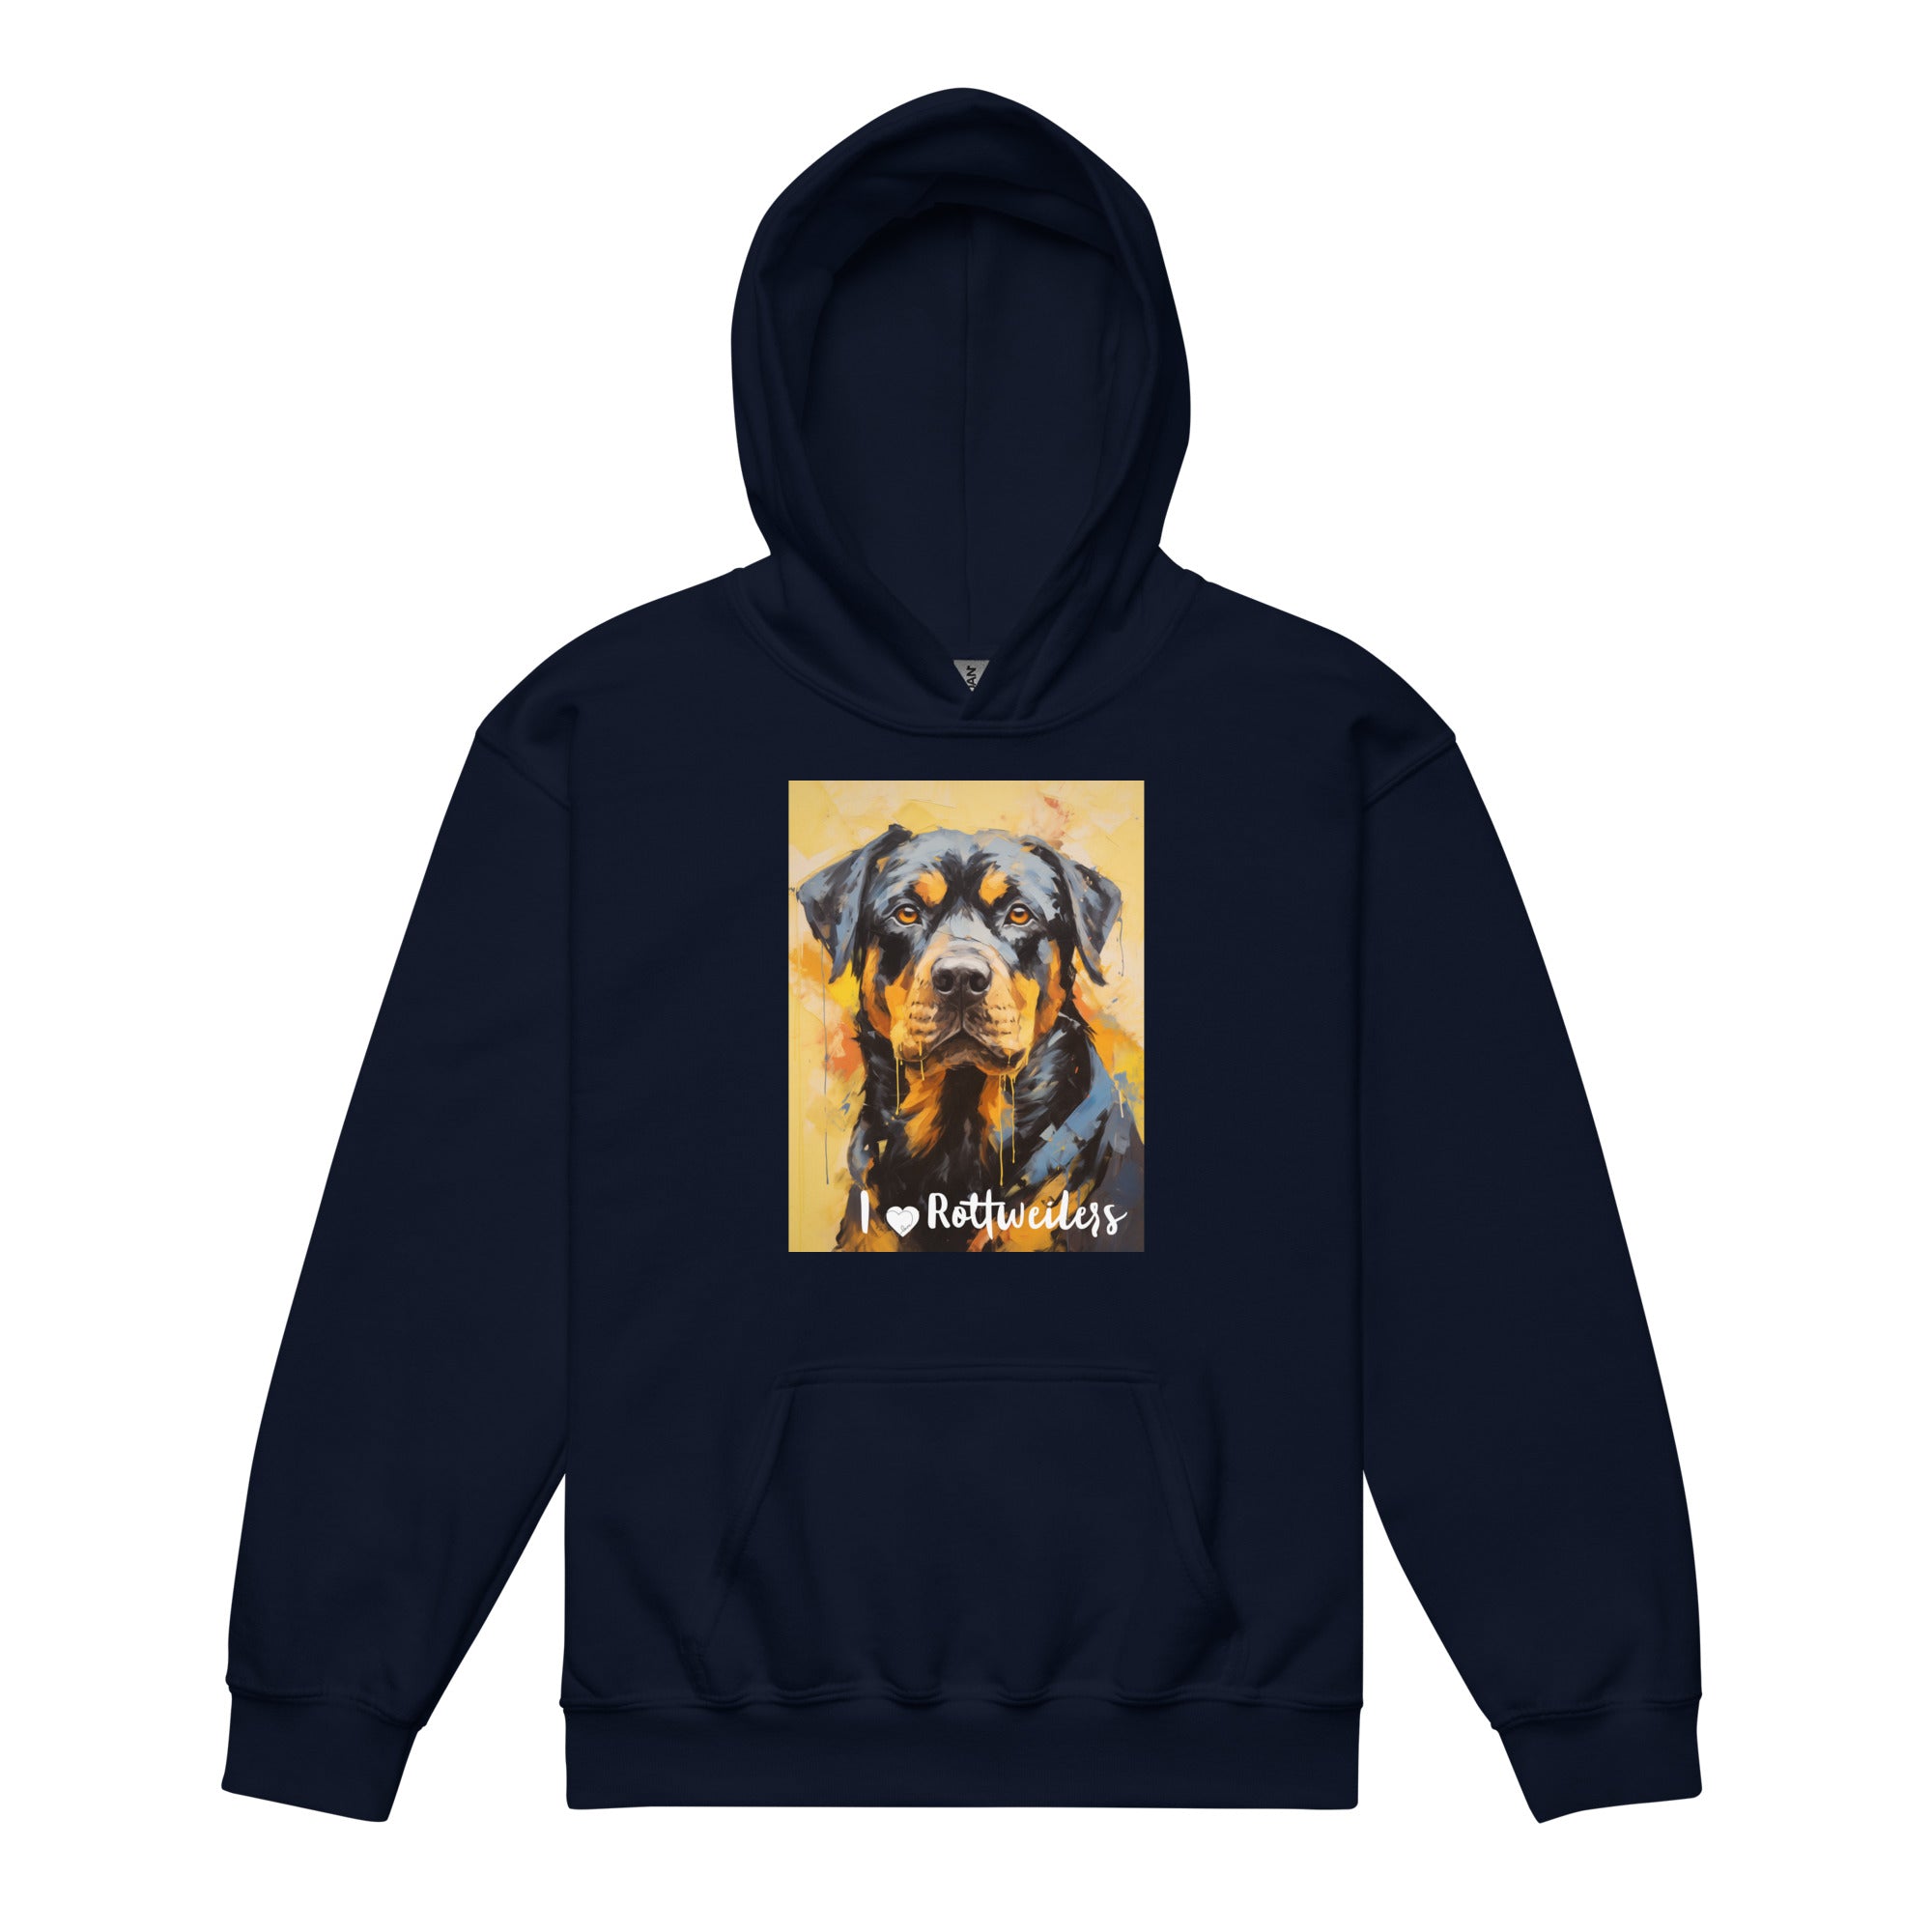 Youth heavy blend hoodie  - I ❤ Dogs - Rottweiler